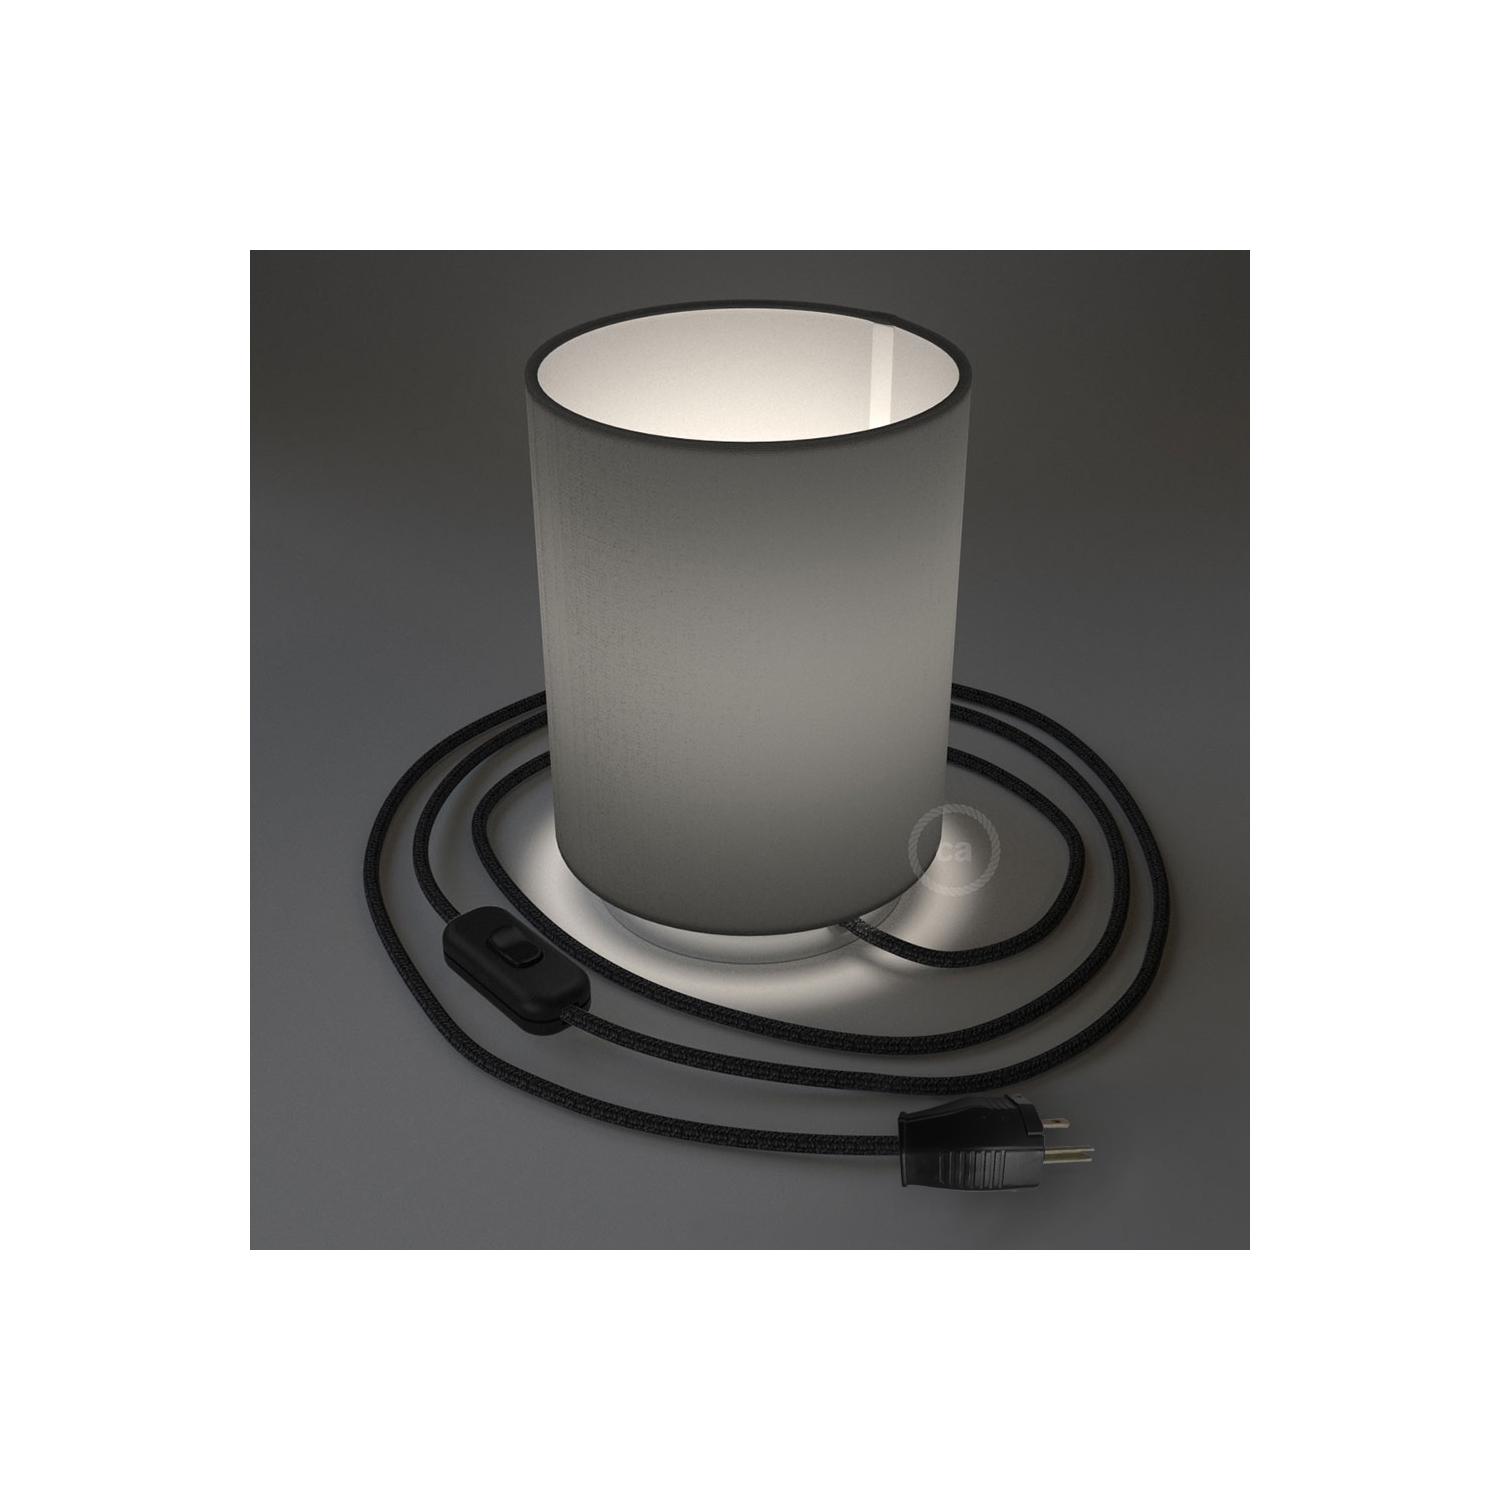 Posaluce with Penguin Electra Cylinder lampshade, chrome metal, with textile cable, switch and plug